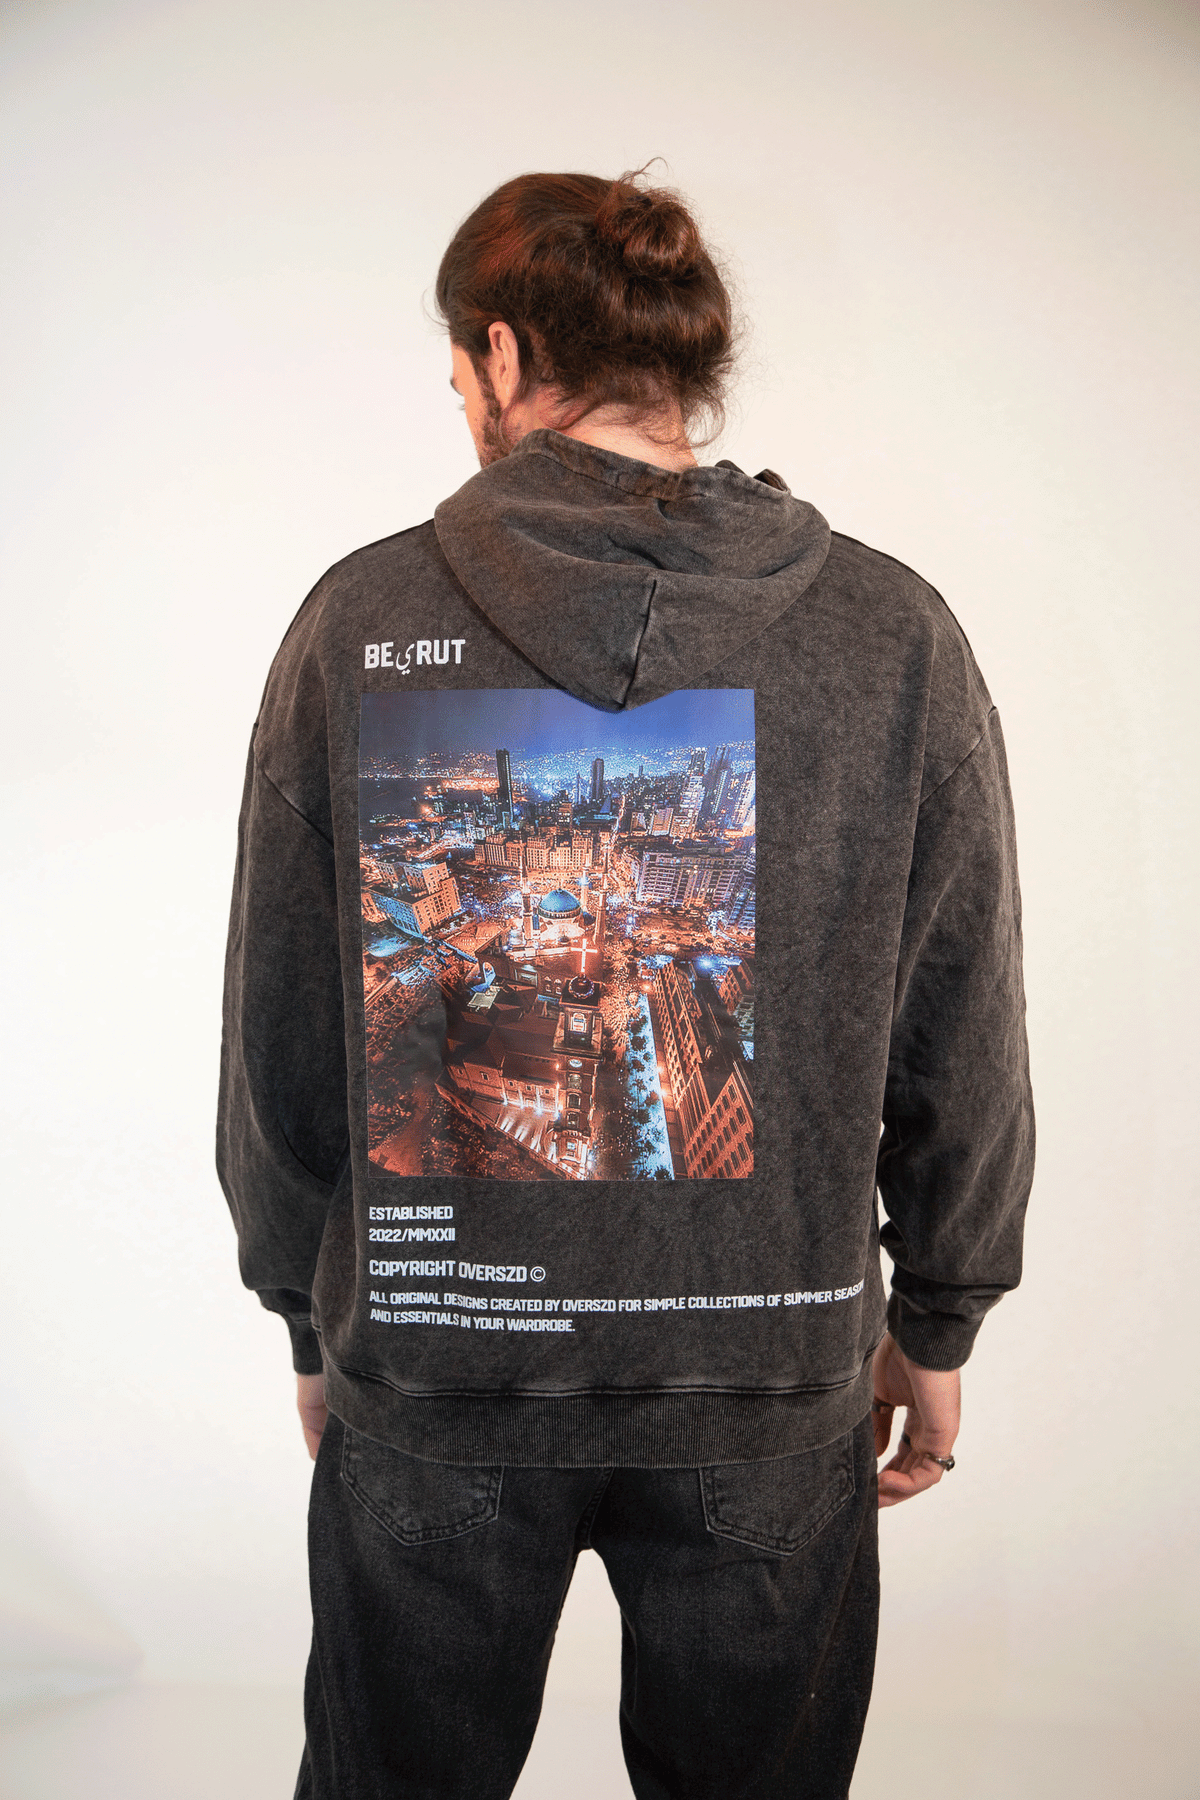 Beيrut Limited Edition Hoodie